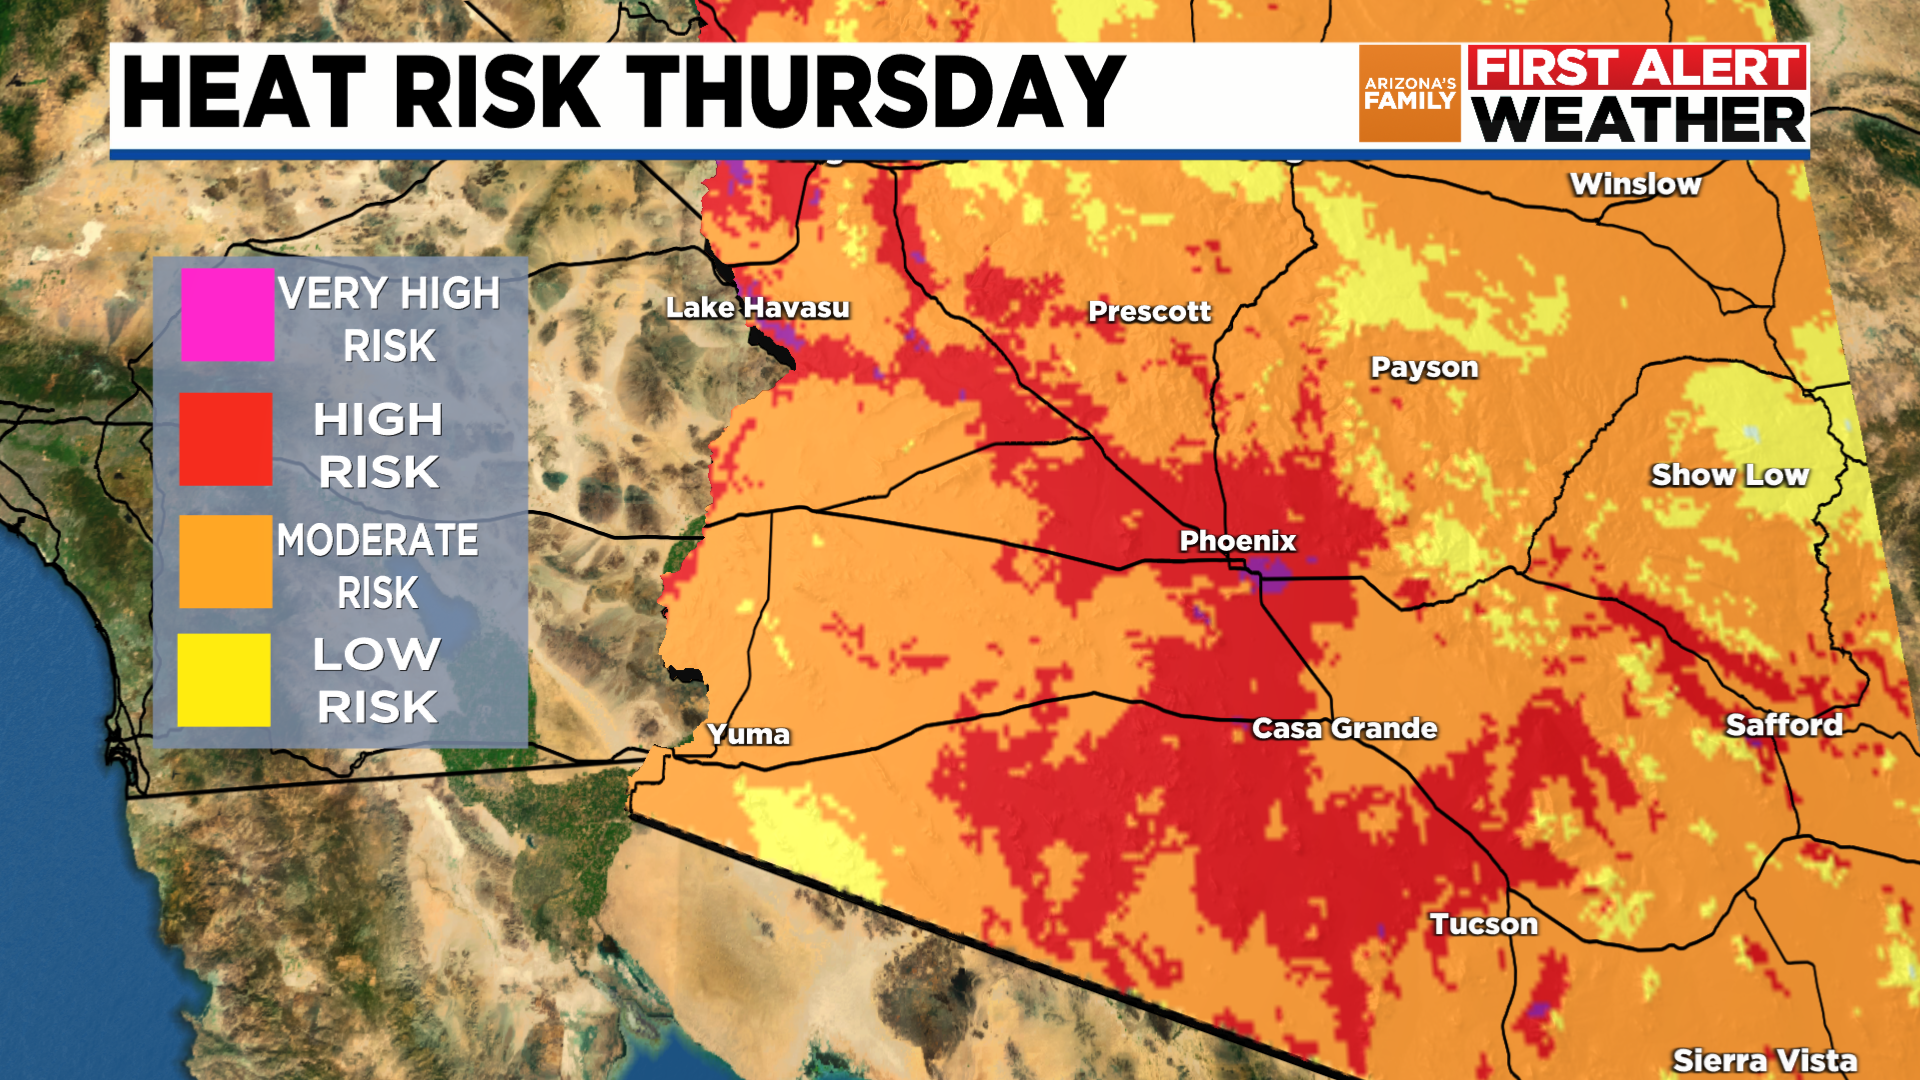 Major risk' from heat up to 115 degrees through Friday night for Tucson,  Southern Az